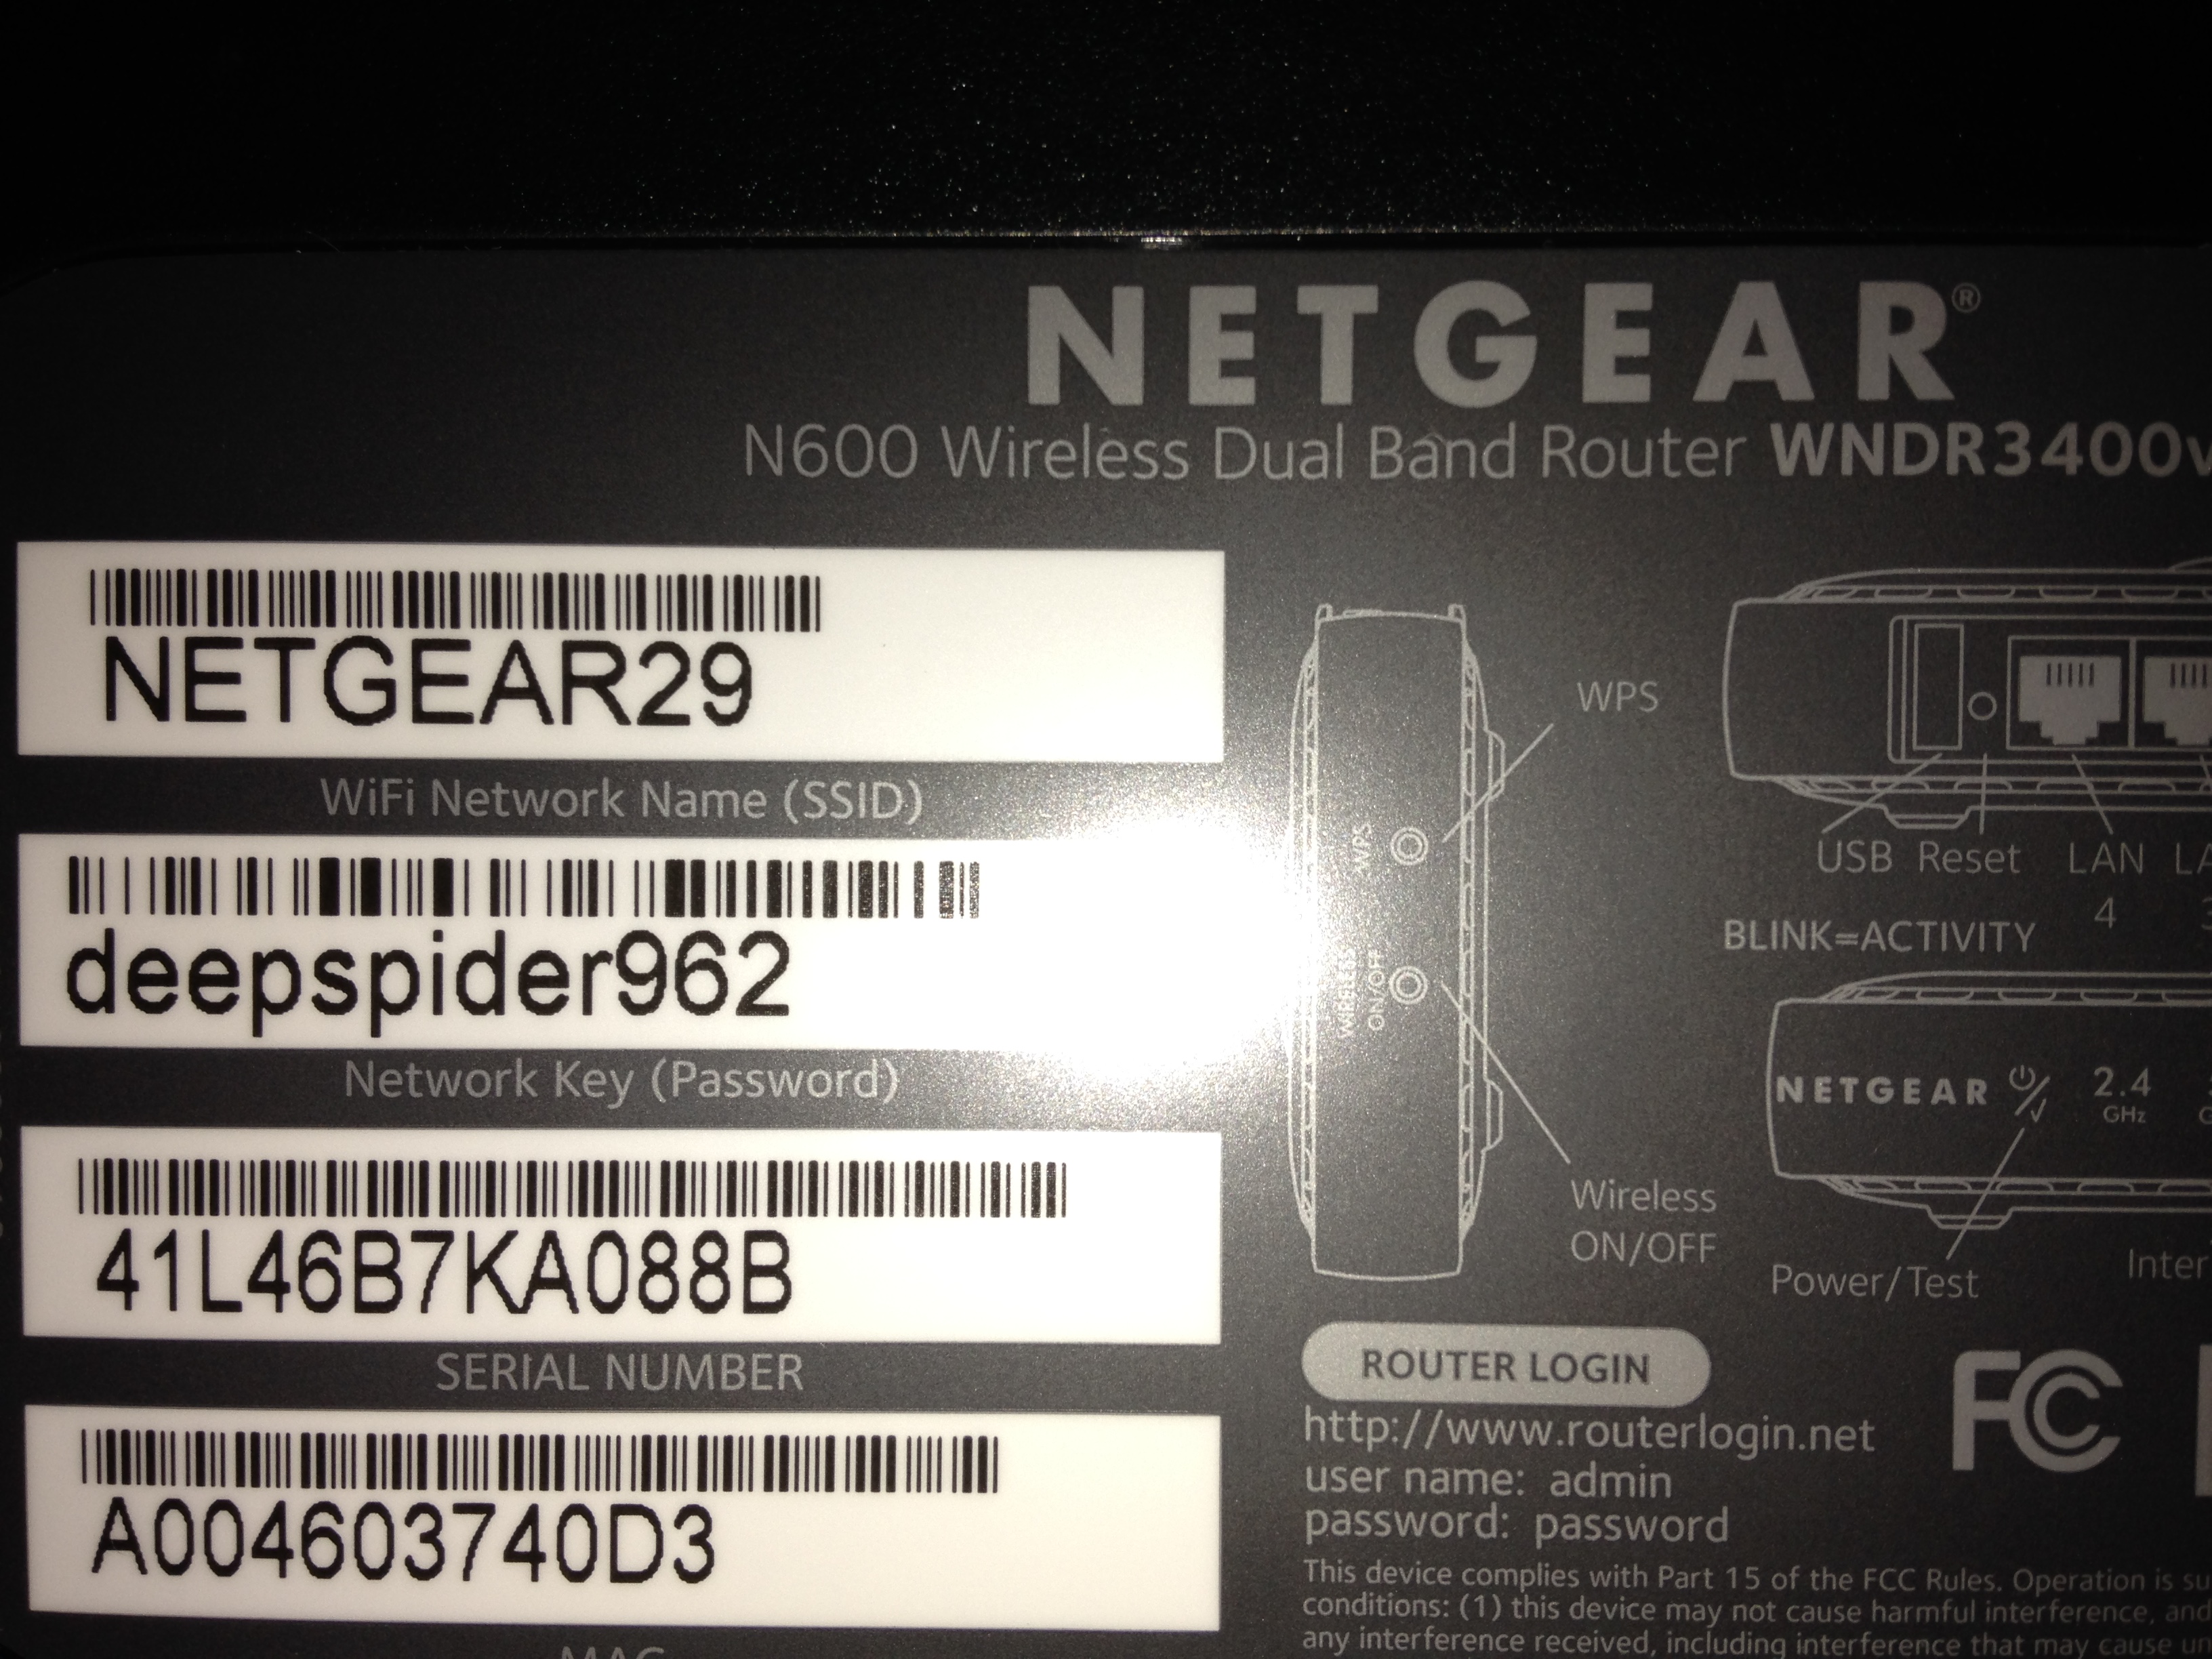 Solved: Re: Can't register my N600 router - NETGEAR Communities